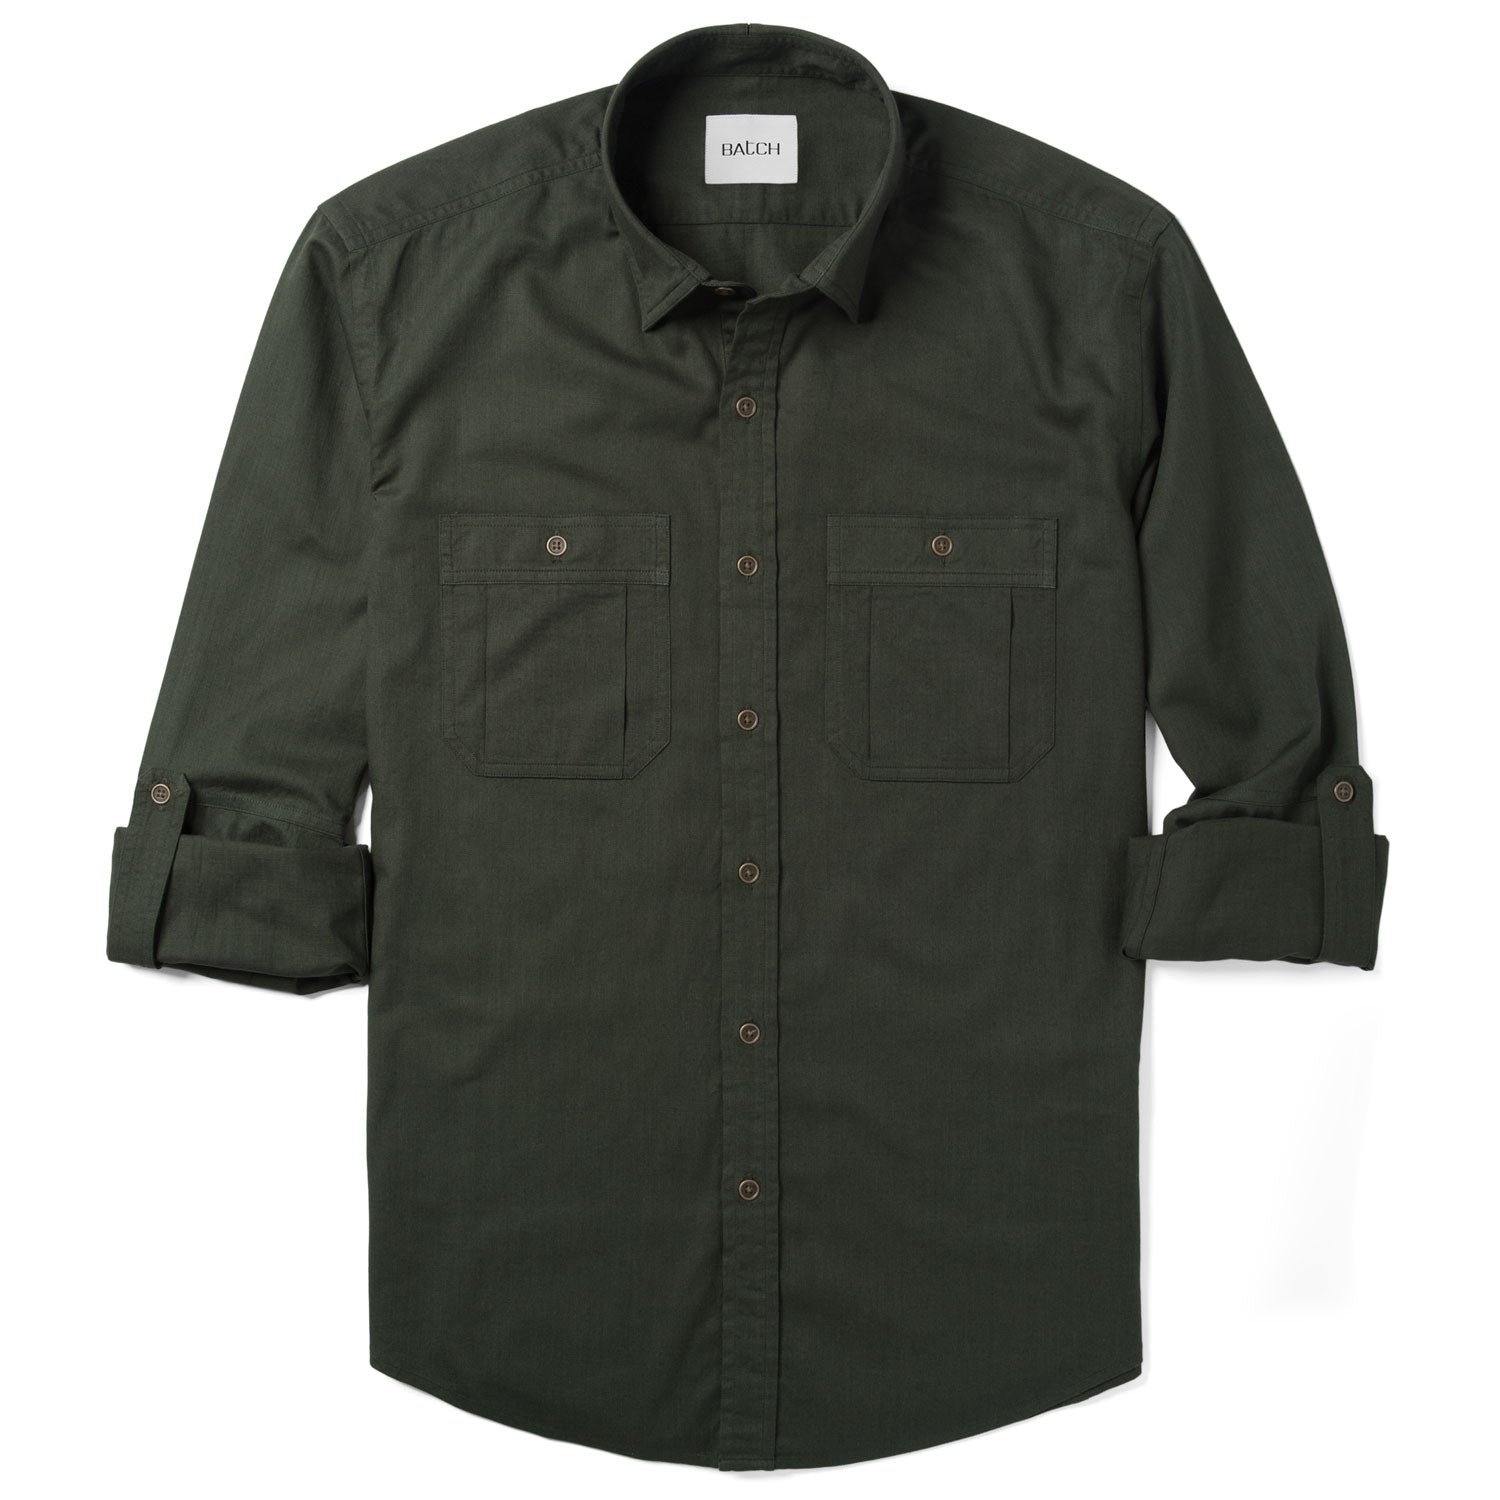 Fixer Utility Shirt – Olive Green Cotton Twill